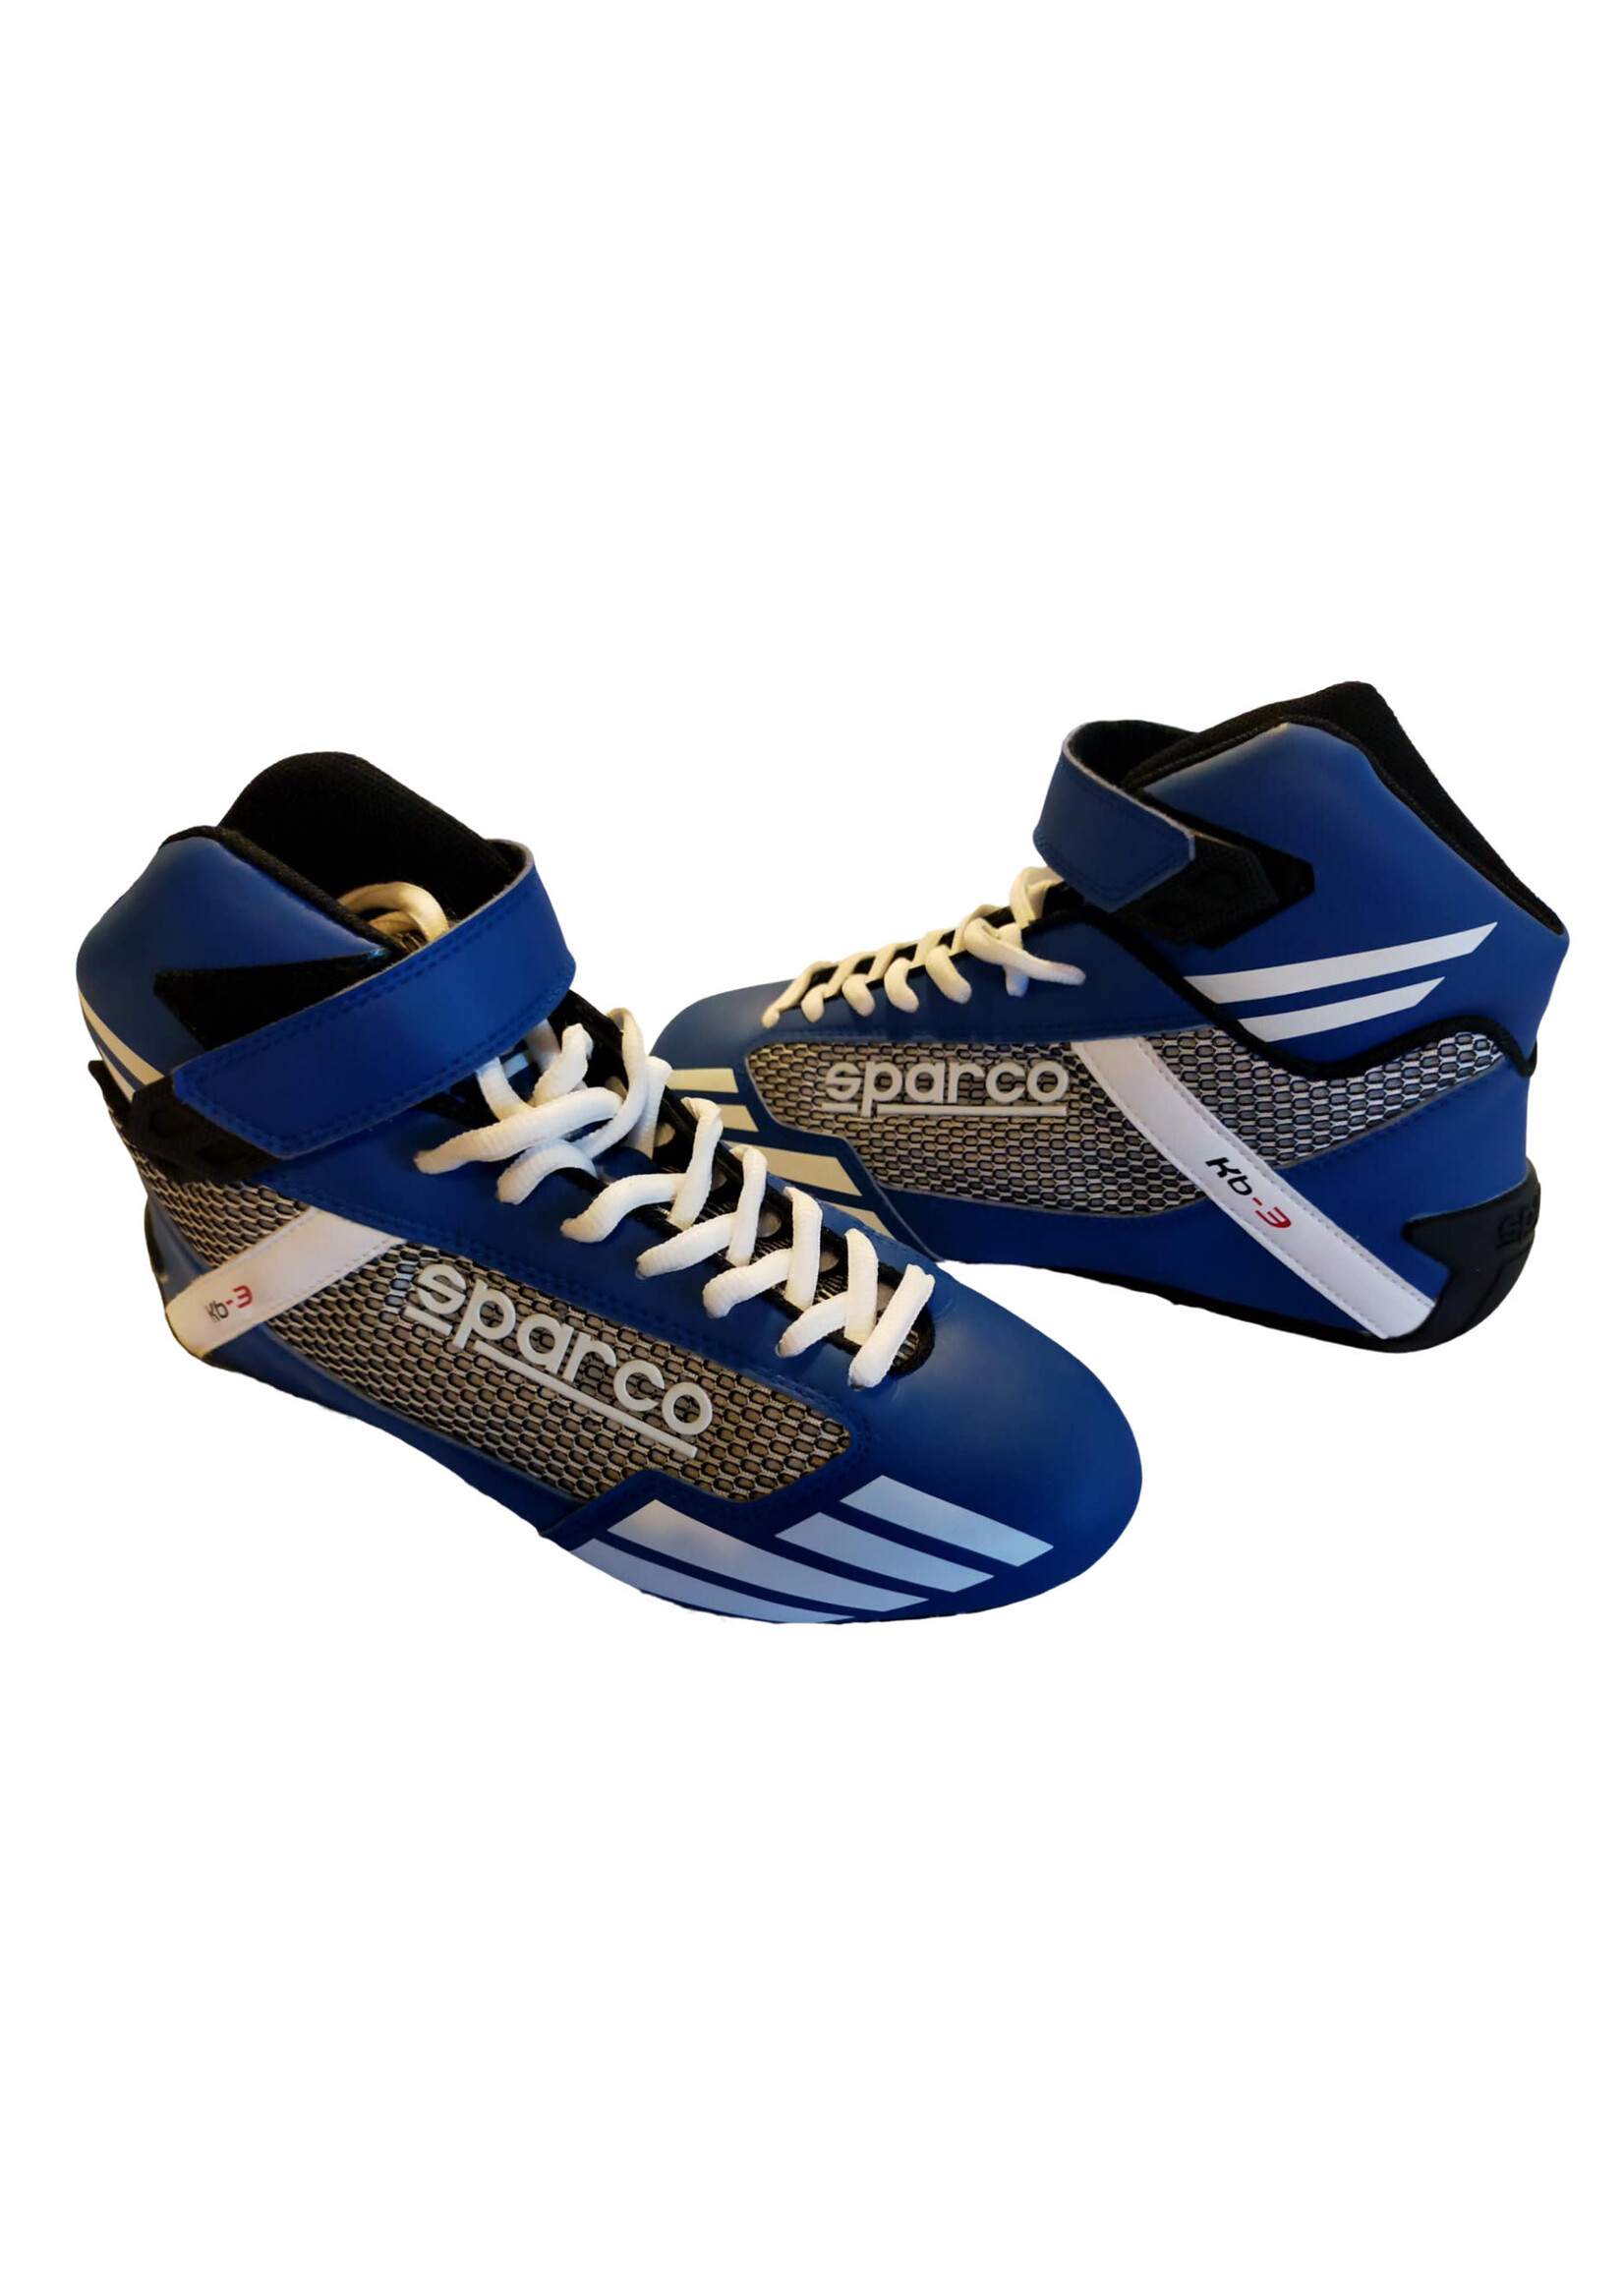 Sparco Sparco KB-3 blauw/wit